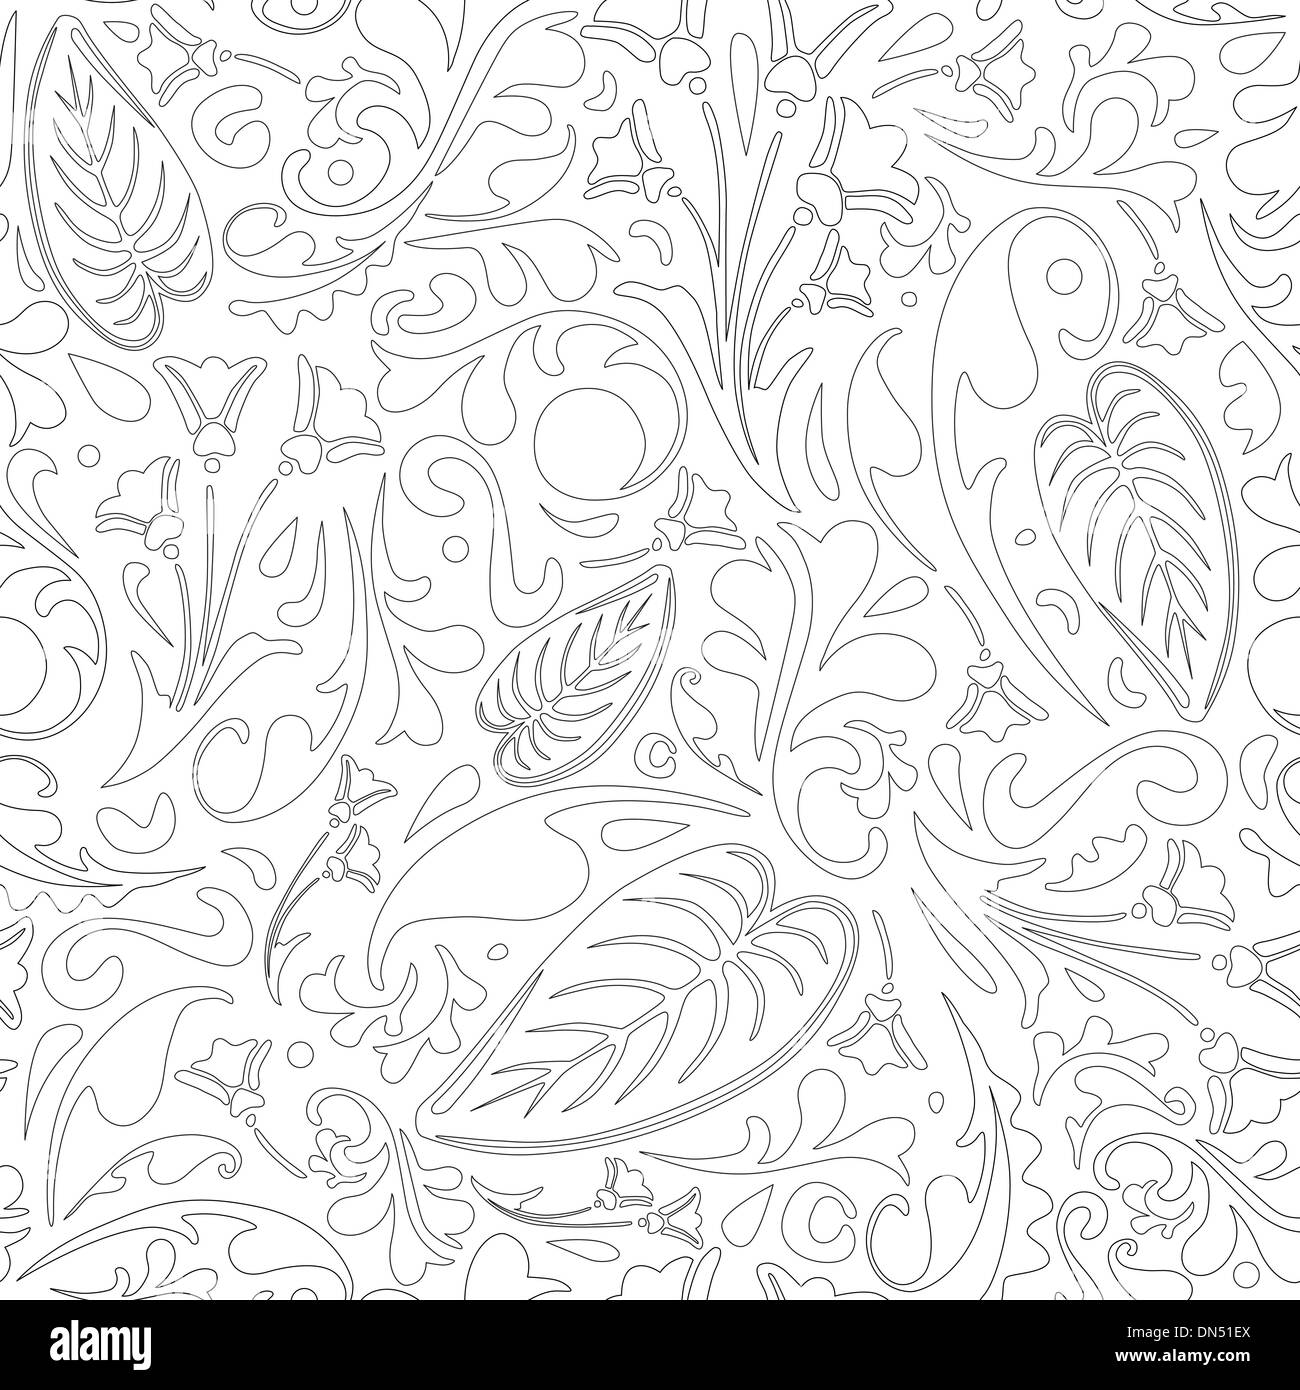 Outlined floral pattern Stock Vector